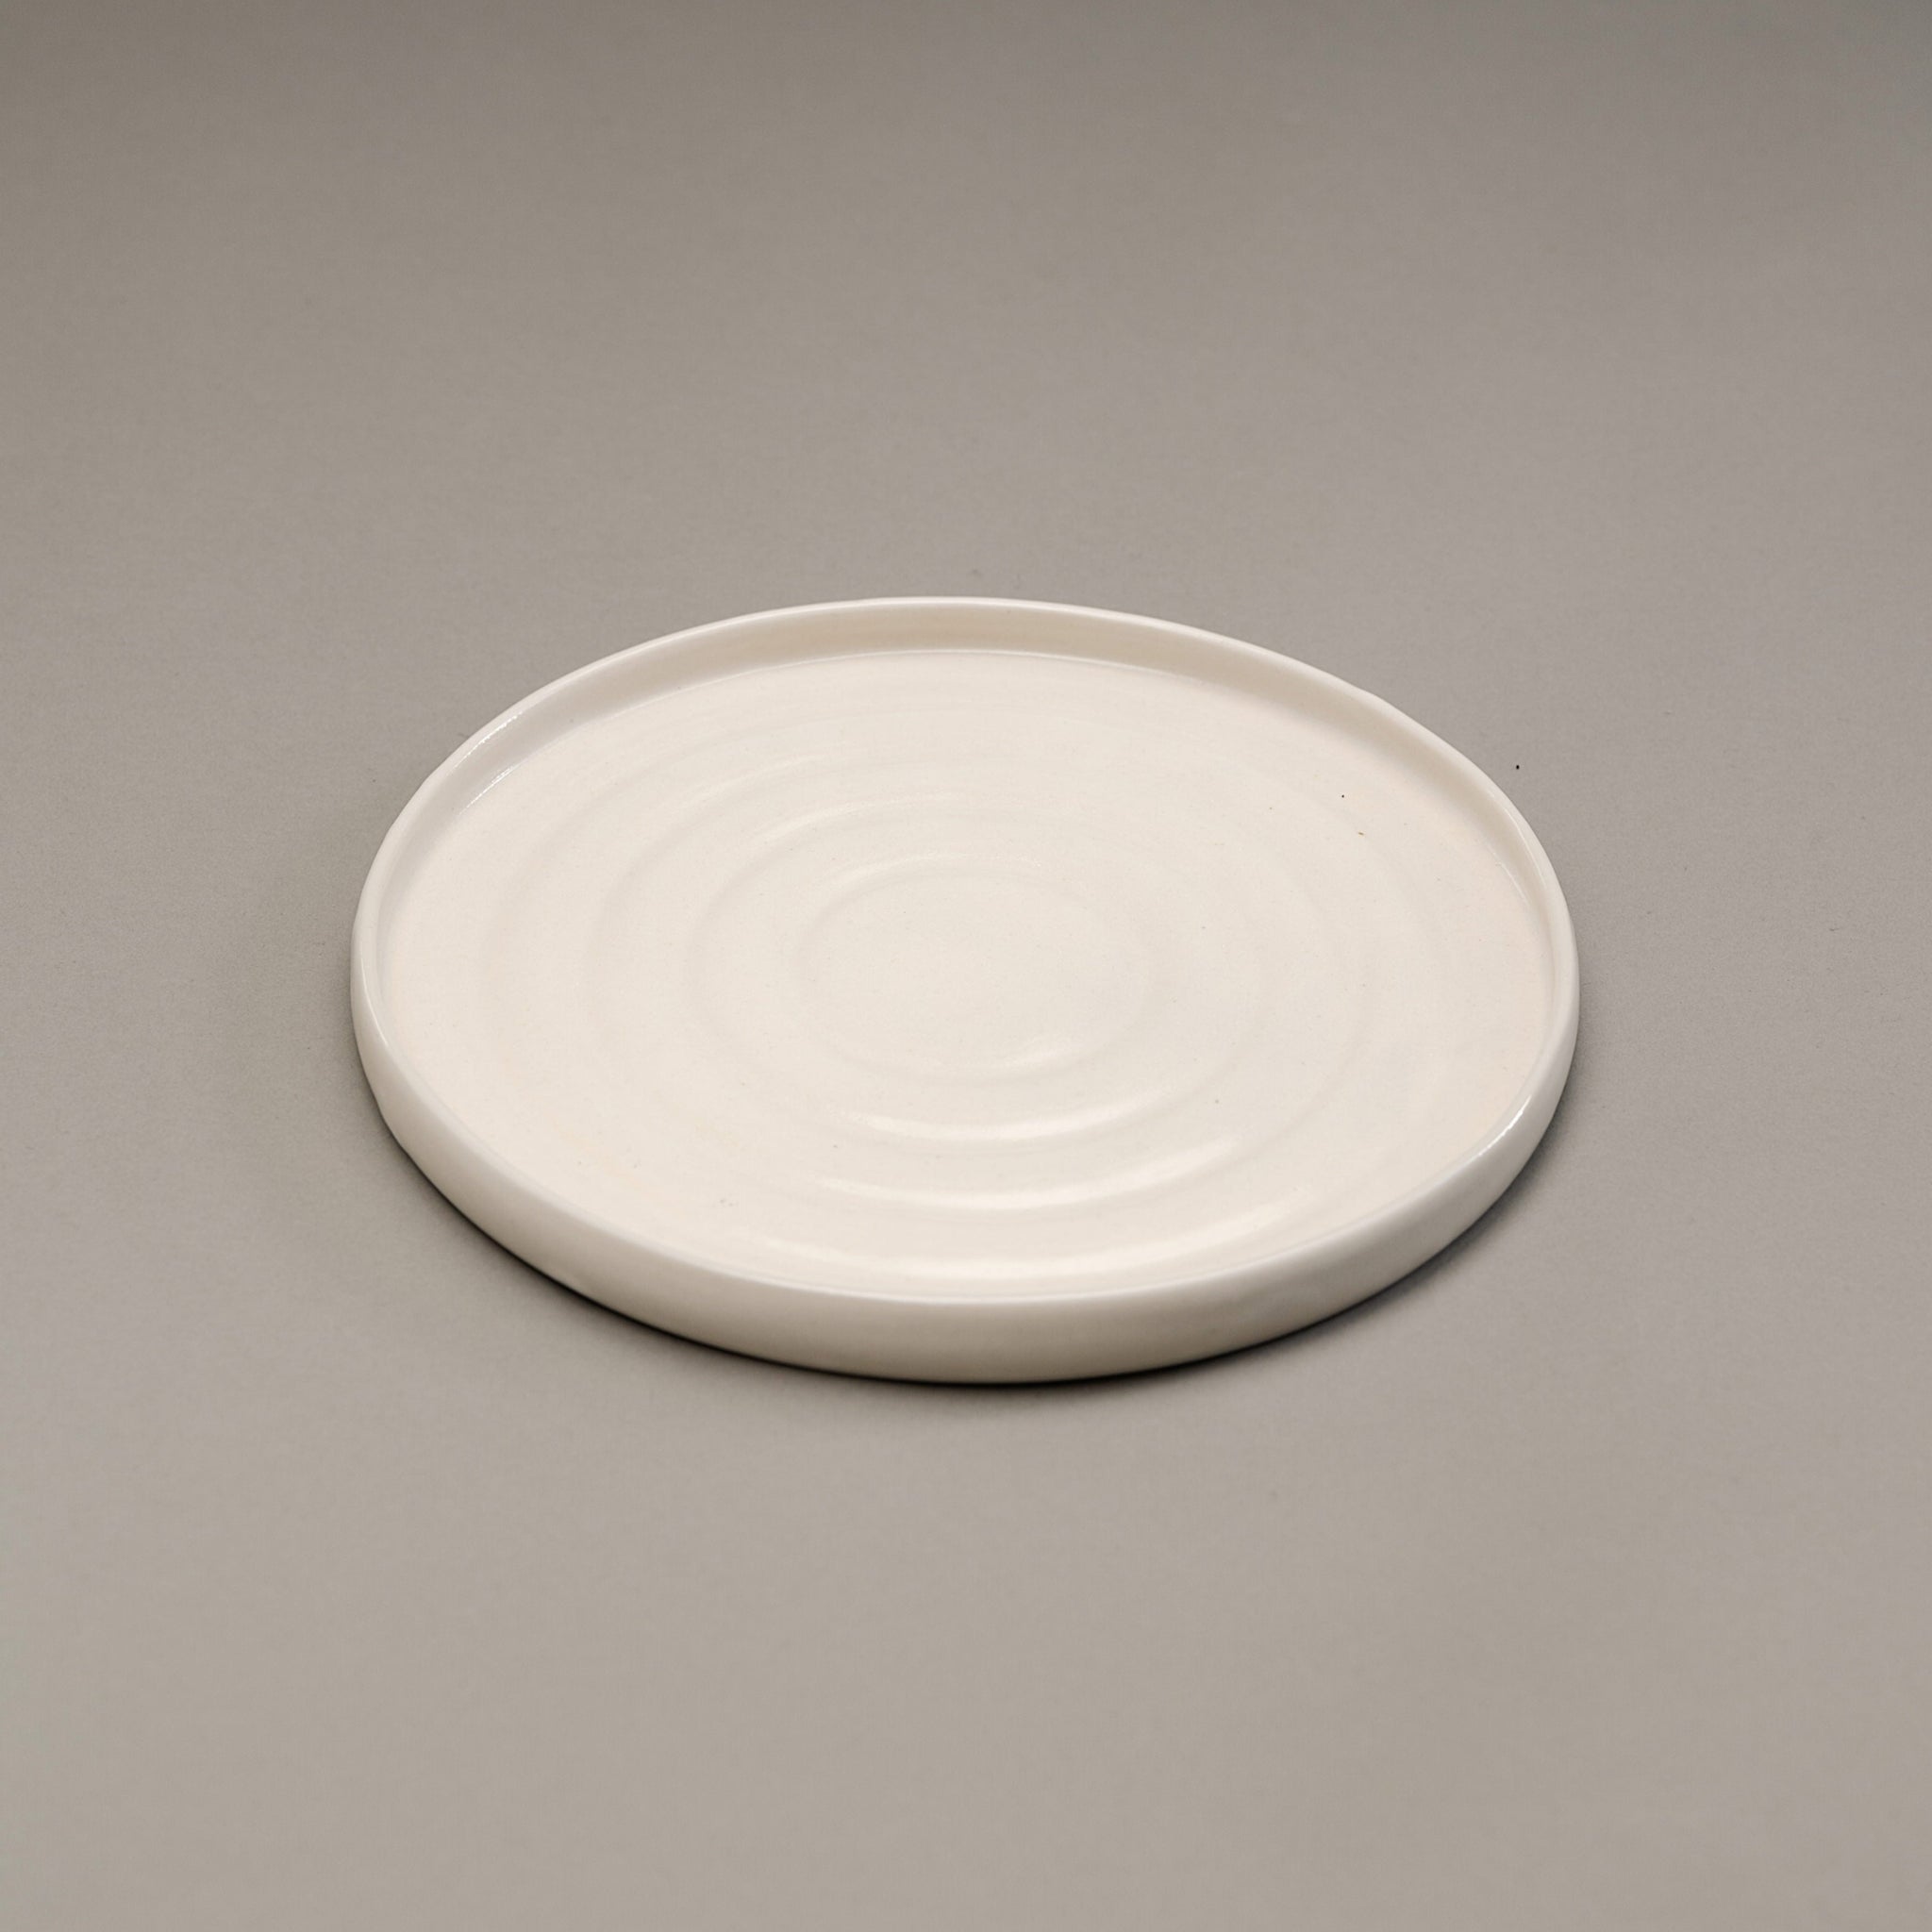 A stoneware dinner plate in a white finish.